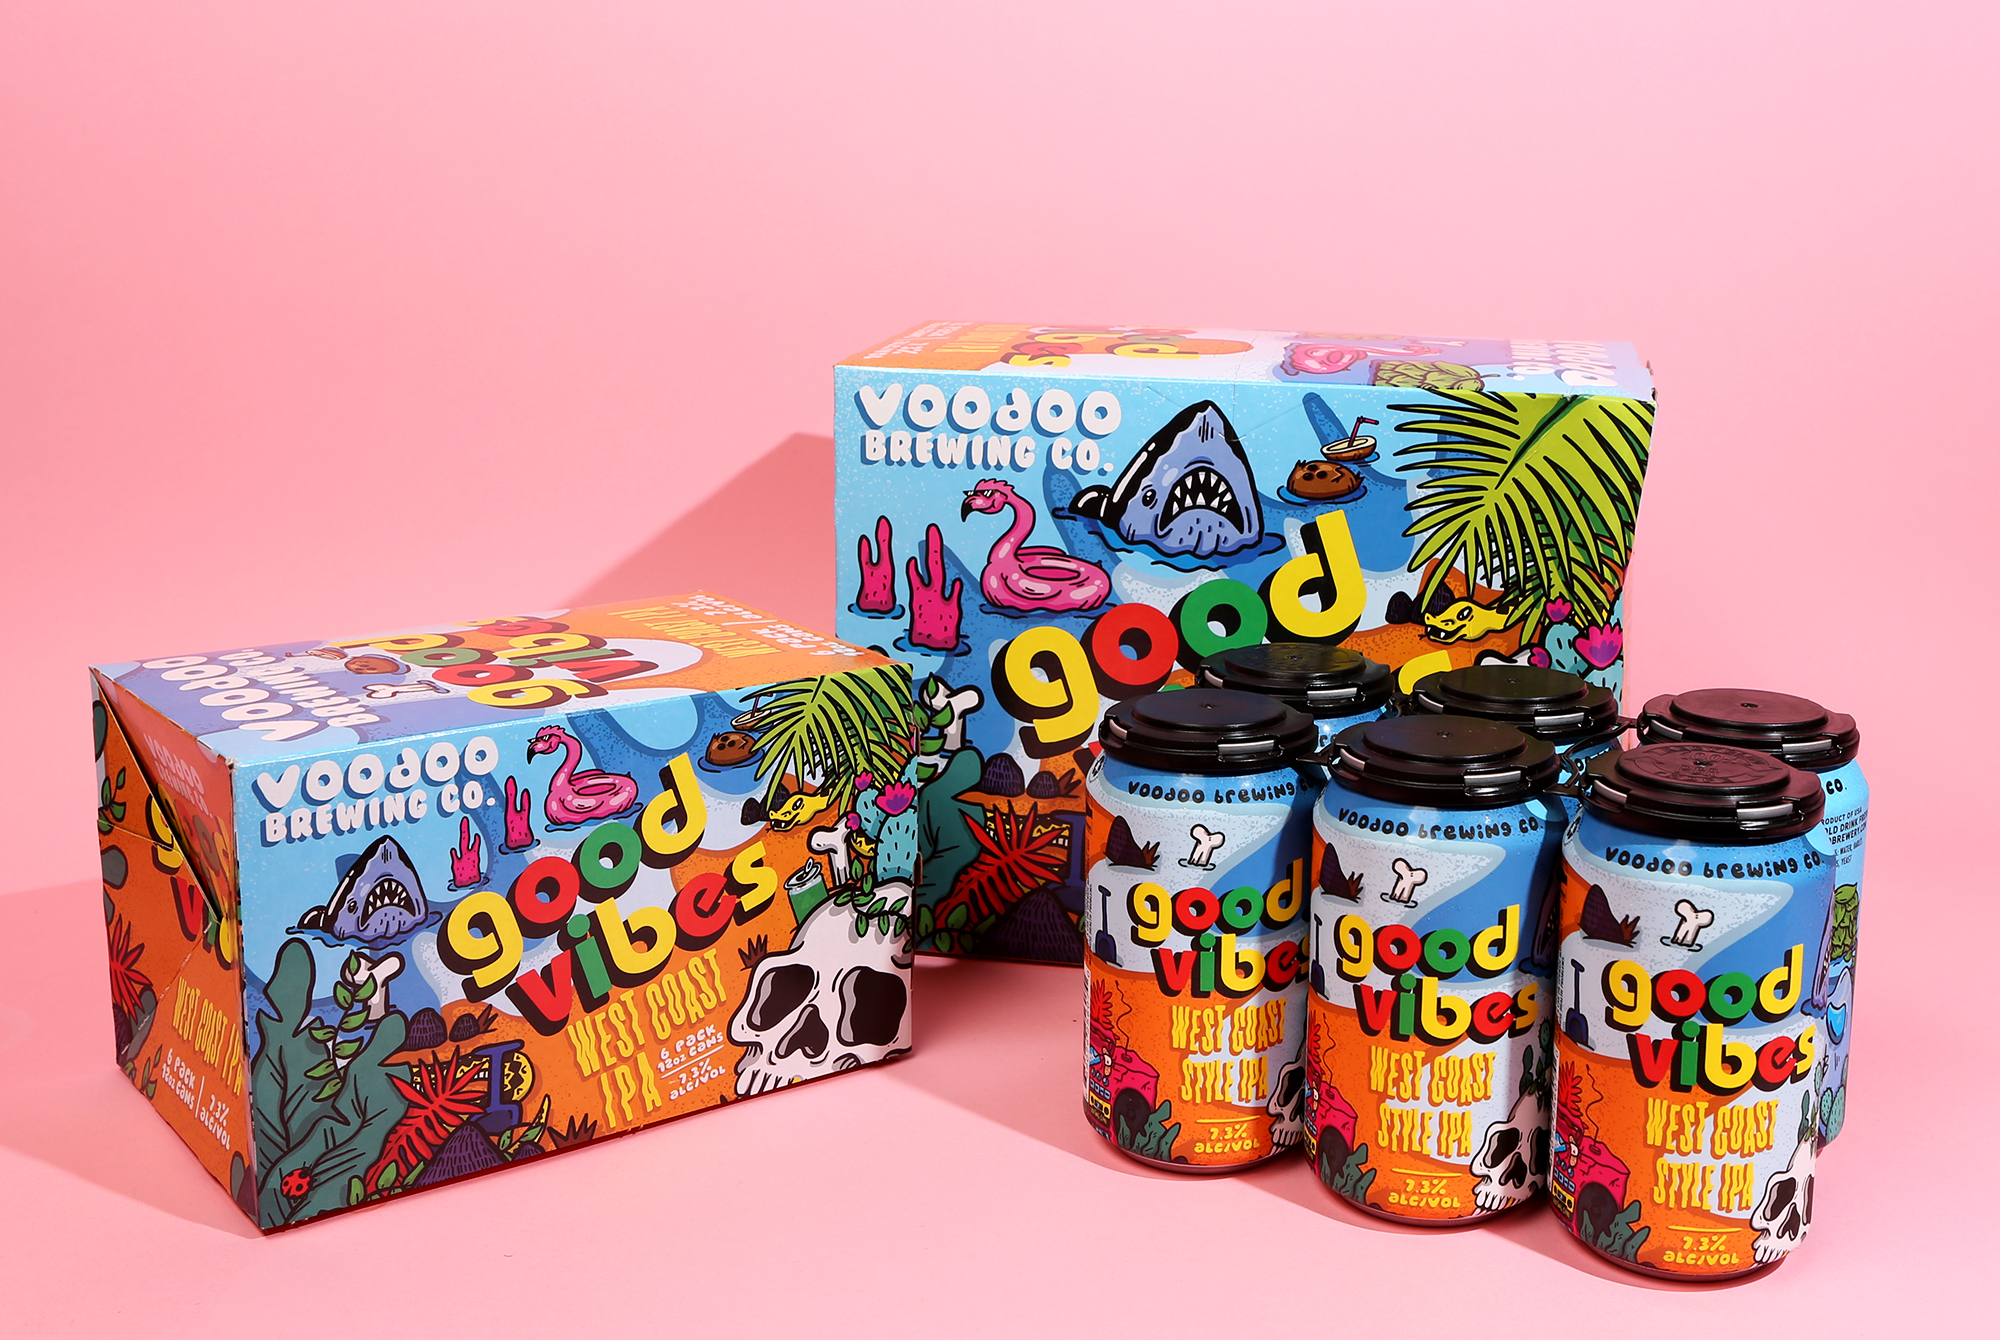 voodoo brewery good vibes cans and box